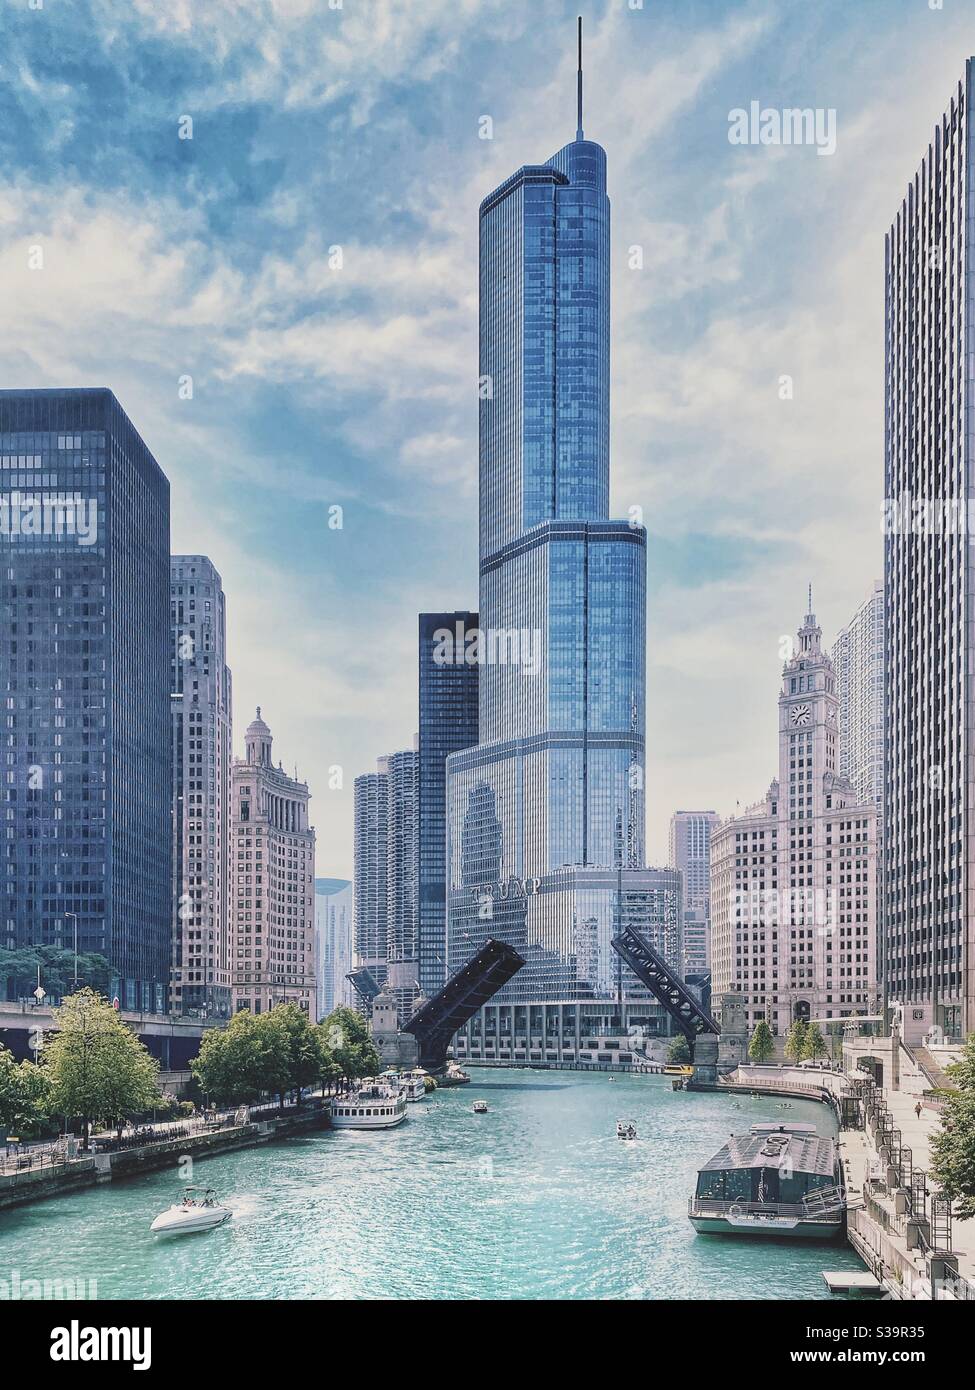 Chicago loop and view of Trump Tower from the Chicago River on a beautiful sunny day Stock Photo